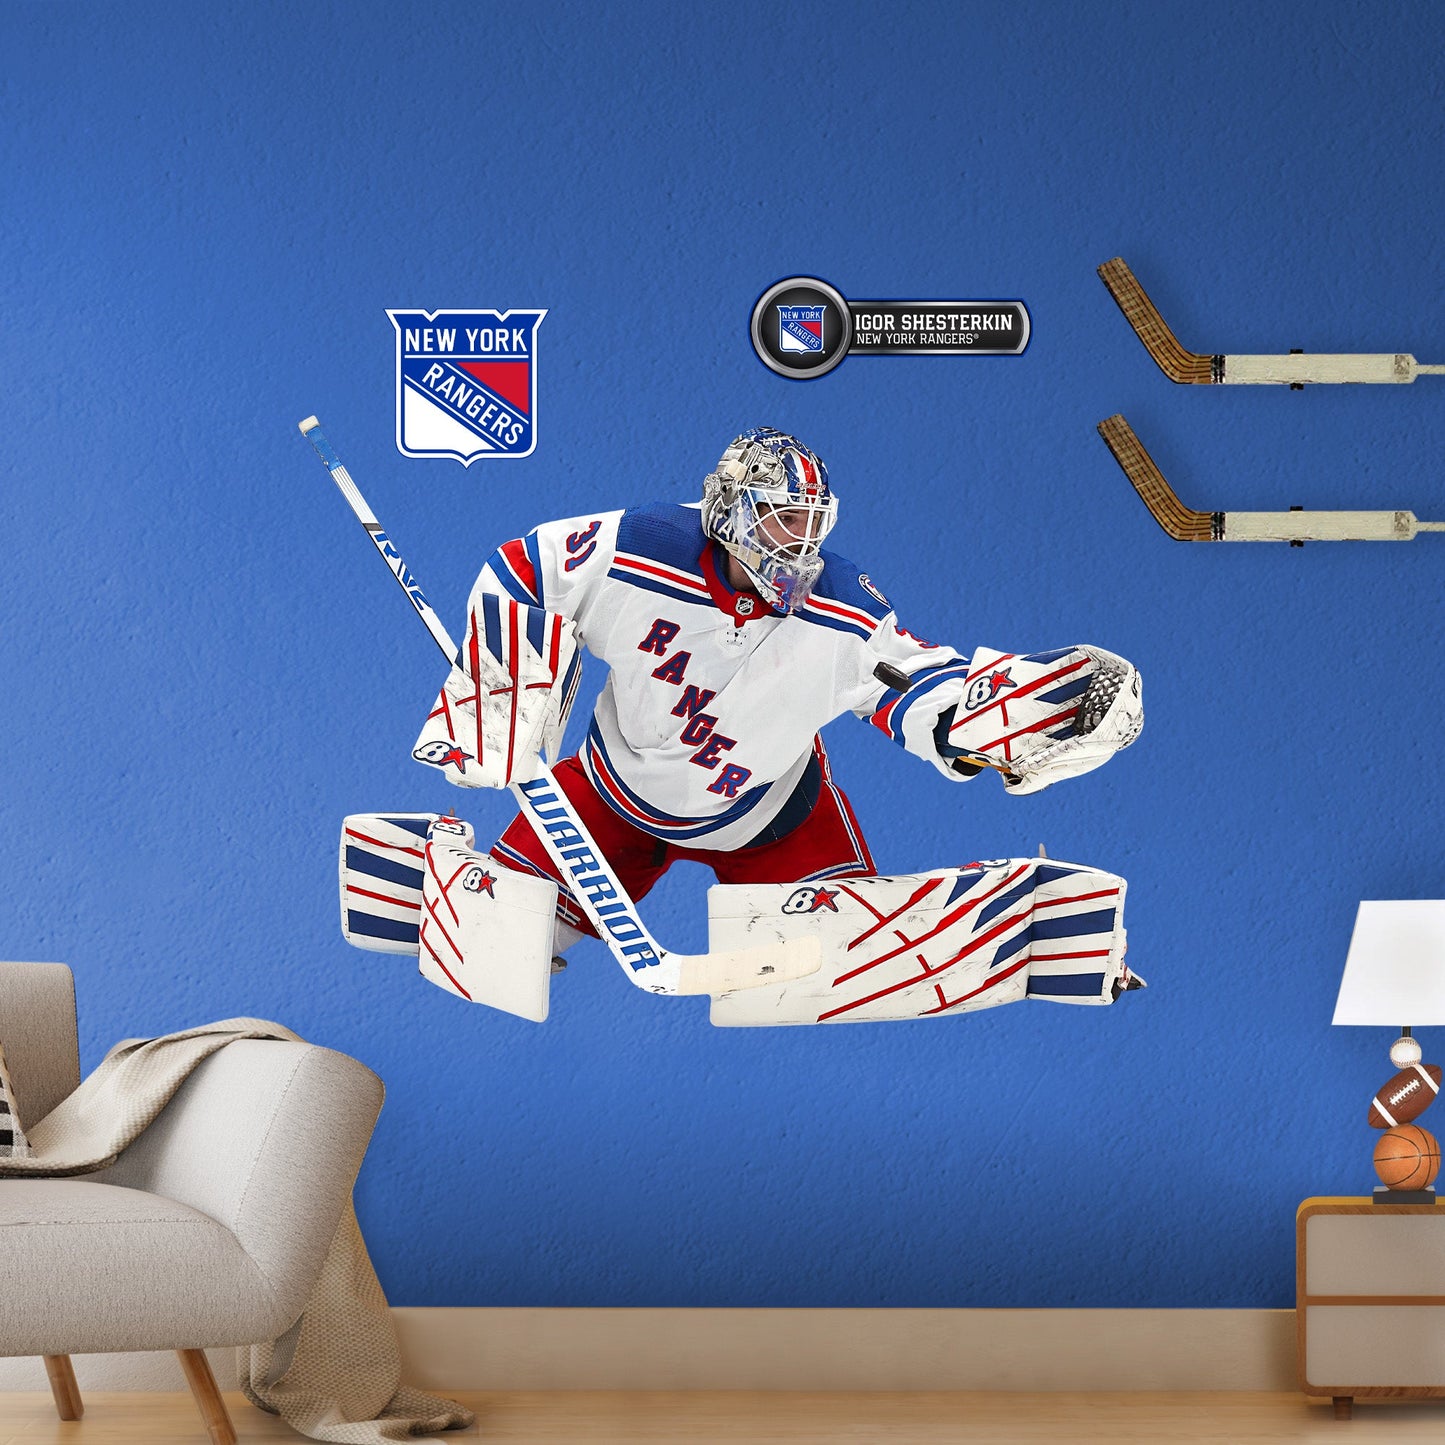 New York Rangers: Igor Shesterkin - Officially Licensed NHL Removable Adhesive Decal